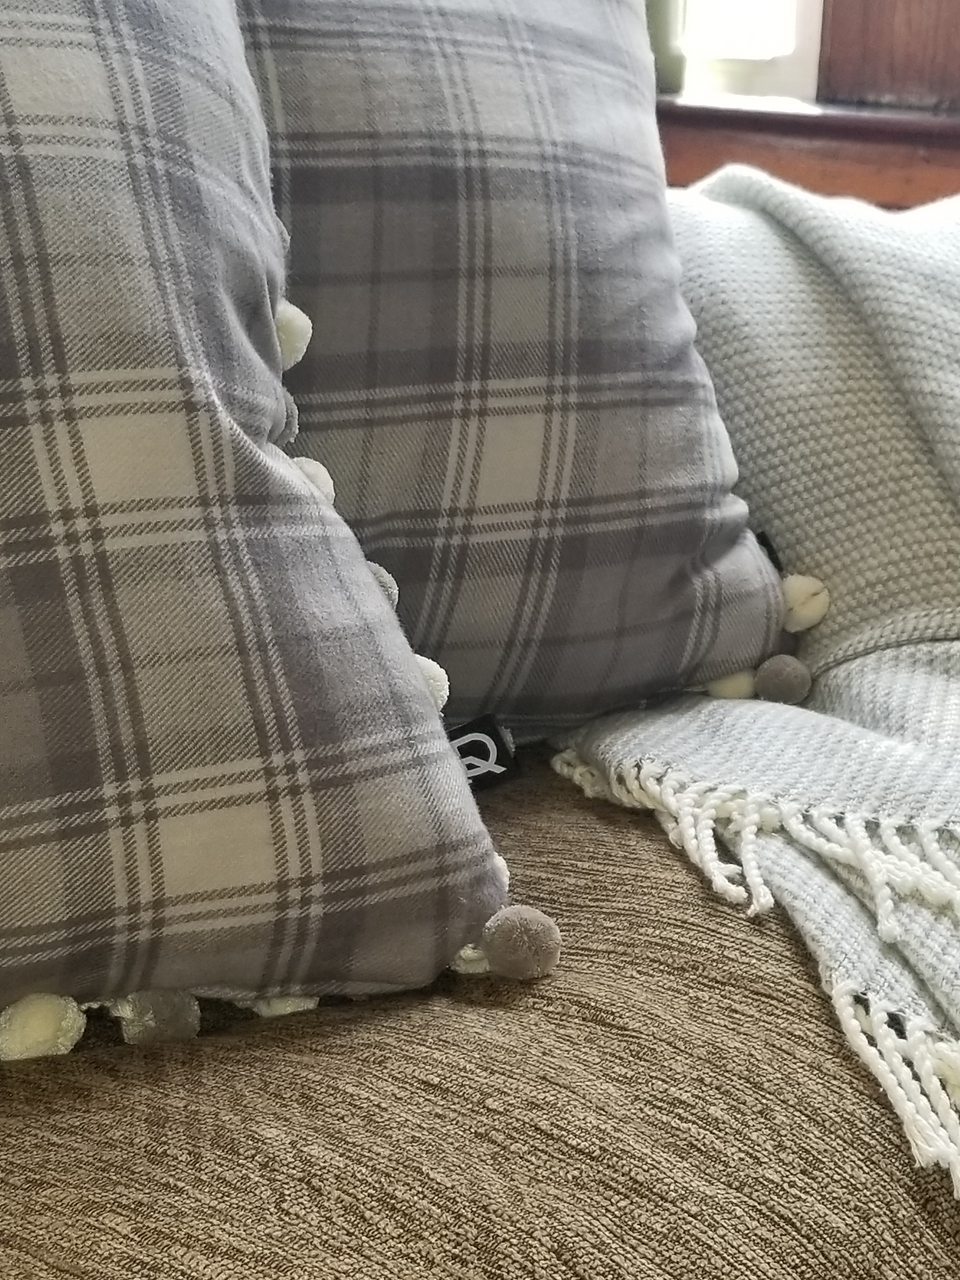 gray plaid pom pom pillow covers on tan couch with taupe throw cover close up